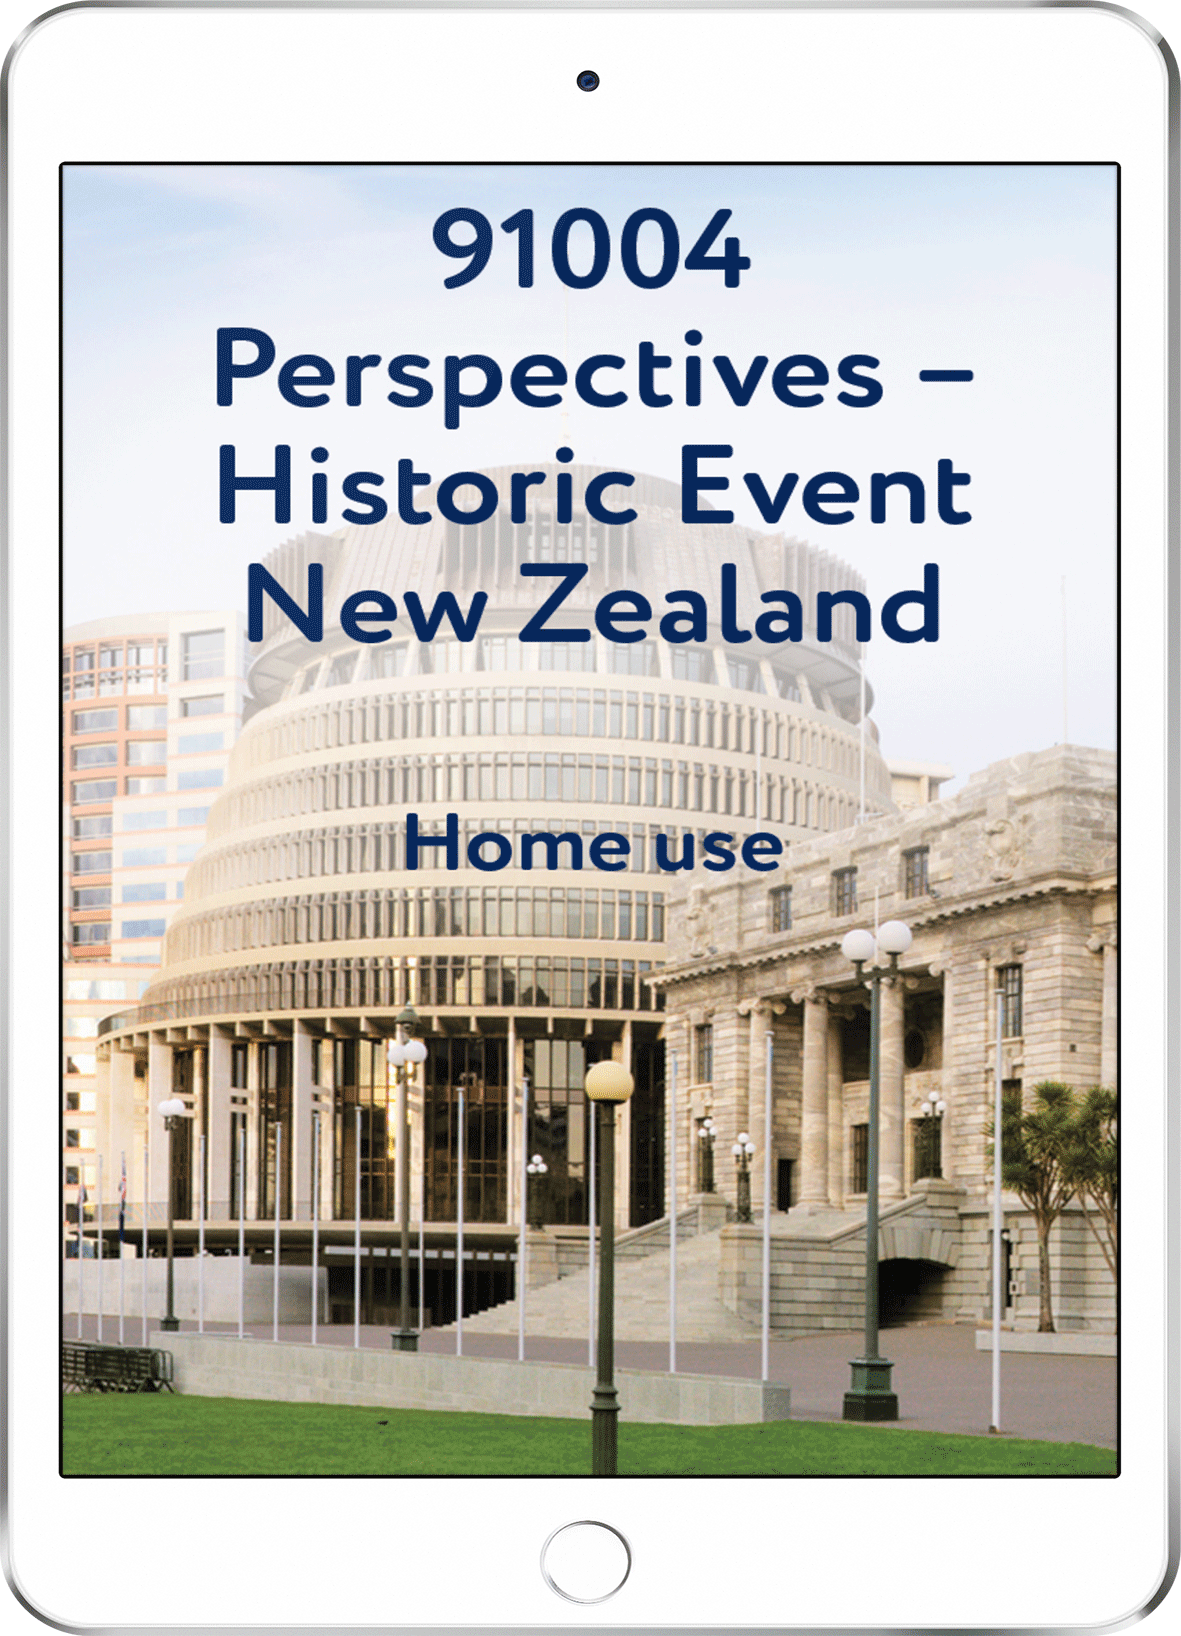 91004 Perspectives - Historic Event NZ - Home Use